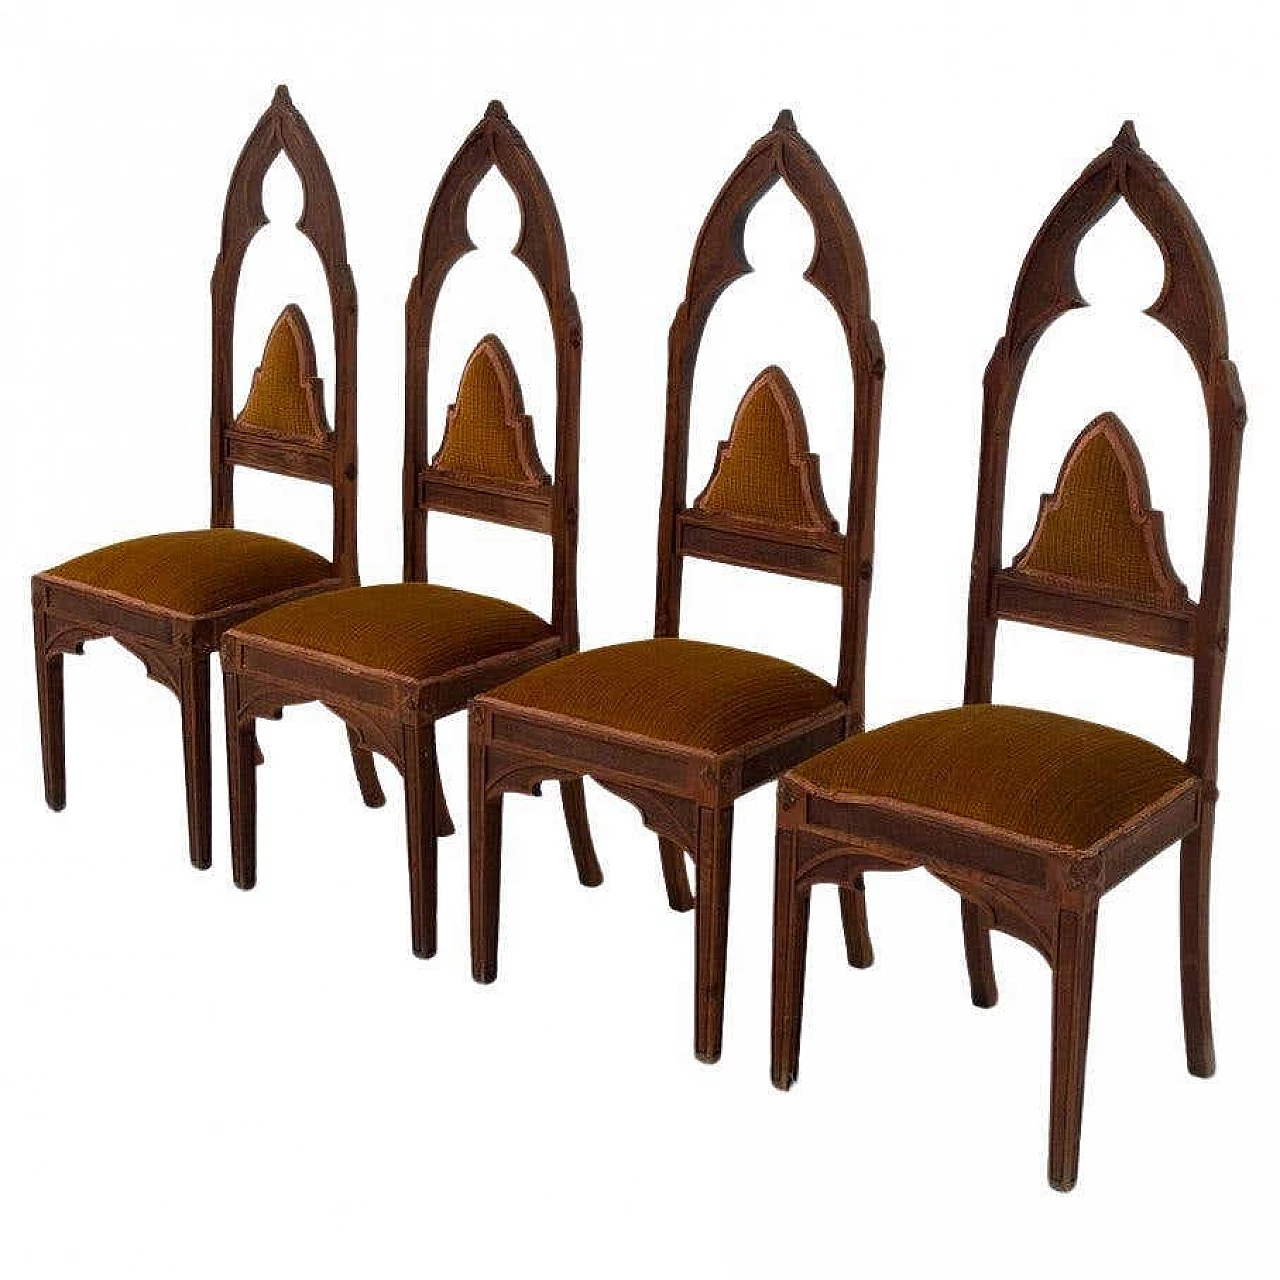 4 Venetian Gothic-style chairs in wood and orange ribbed fabric, 1920s 11